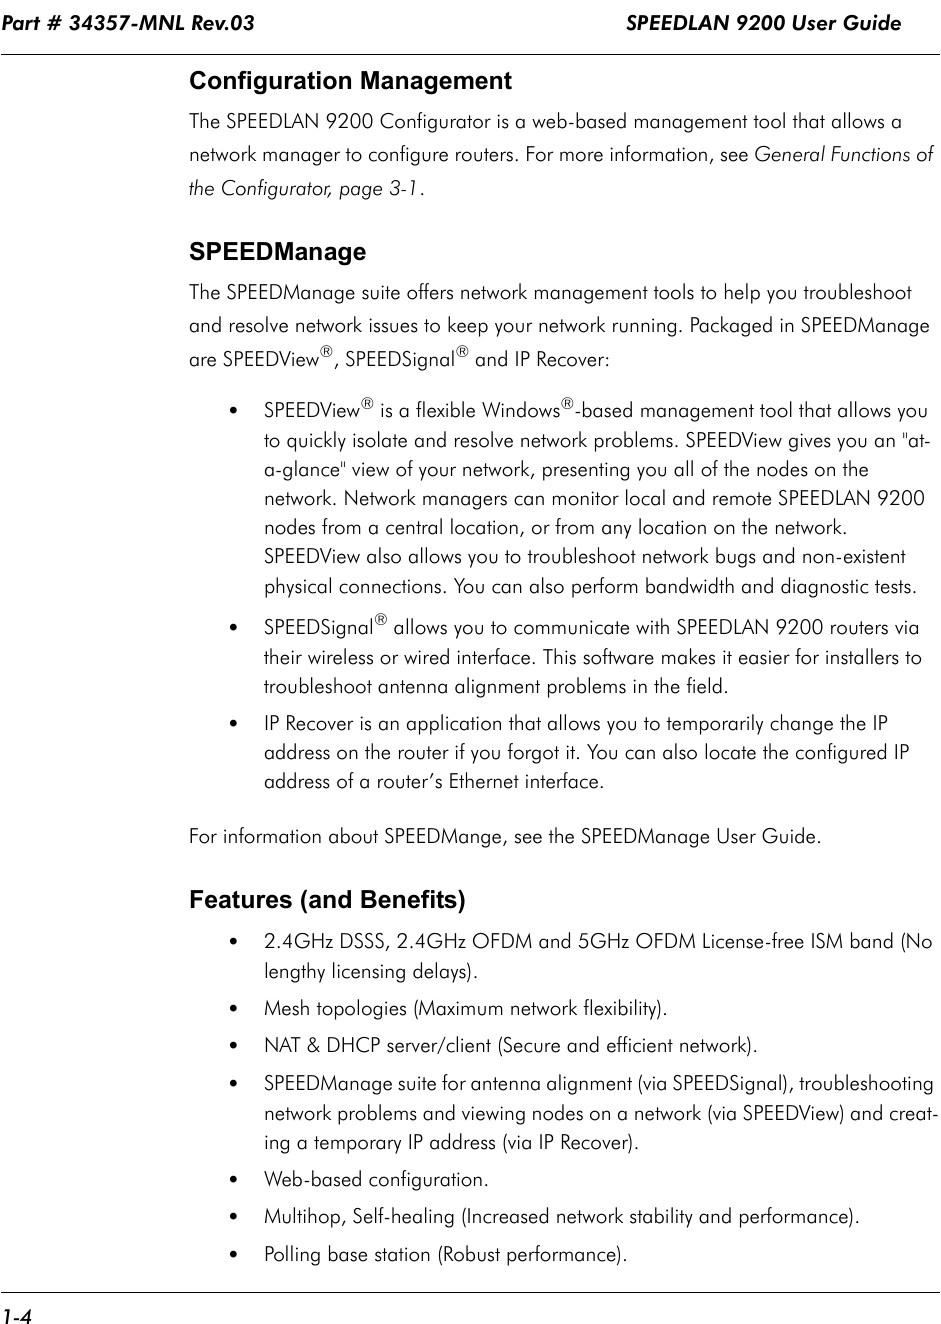 Part # 34357-MNL Rev.03                                                            SPEEDLAN 9200 User Guide 1-4Configuration ManagementThe SPEEDLAN 9200 Configurator is a web-based management tool that allows a network manager to configure routers. For more information, see General Functions of the Configurator, page 3-1. SPEEDManageThe SPEEDManage suite offers network management tools to help you troubleshoot and resolve network issues to keep your network running. Packaged in SPEEDManage are SPEEDView®, SPEEDSignal® and IP Recover:•SPEEDView® is a flexible Windows®-based management tool that allows you to quickly isolate and resolve network problems. SPEEDView gives you an &quot;at-a-glance&quot; view of your network, presenting you all of the nodes on the network. Network managers can monitor local and remote SPEEDLAN 9200 nodes from a central location, or from any location on the network. SPEEDView also allows you to troubleshoot network bugs and non-existent physical connections. You can also perform bandwidth and diagnostic tests. •SPEEDSignal® allows you to communicate with SPEEDLAN 9200 routers via their wireless or wired interface. This software makes it easier for installers to troubleshoot antenna alignment problems in the field.   •IP Recover is an application that allows you to temporarily change the IP address on the router if you forgot it. You can also locate the configured IP address of a router’s Ethernet interface.For information about SPEEDMange, see the SPEEDManage User Guide.Features (and Benefits)•2.4GHz DSSS, 2.4GHz OFDM and 5GHz OFDM License-free ISM band (No lengthy licensing delays).•Mesh topologies (Maximum network flexibility).•NAT &amp; DHCP server/client (Secure and efficient network).•SPEEDManage suite for antenna alignment (via SPEEDSignal), troubleshooting network problems and viewing nodes on a network (via SPEEDView) and creat-ing a temporary IP address (via IP Recover).•Web-based configuration.•Multihop, Self-healing (Increased network stability and performance).•Polling base station (Robust performance).